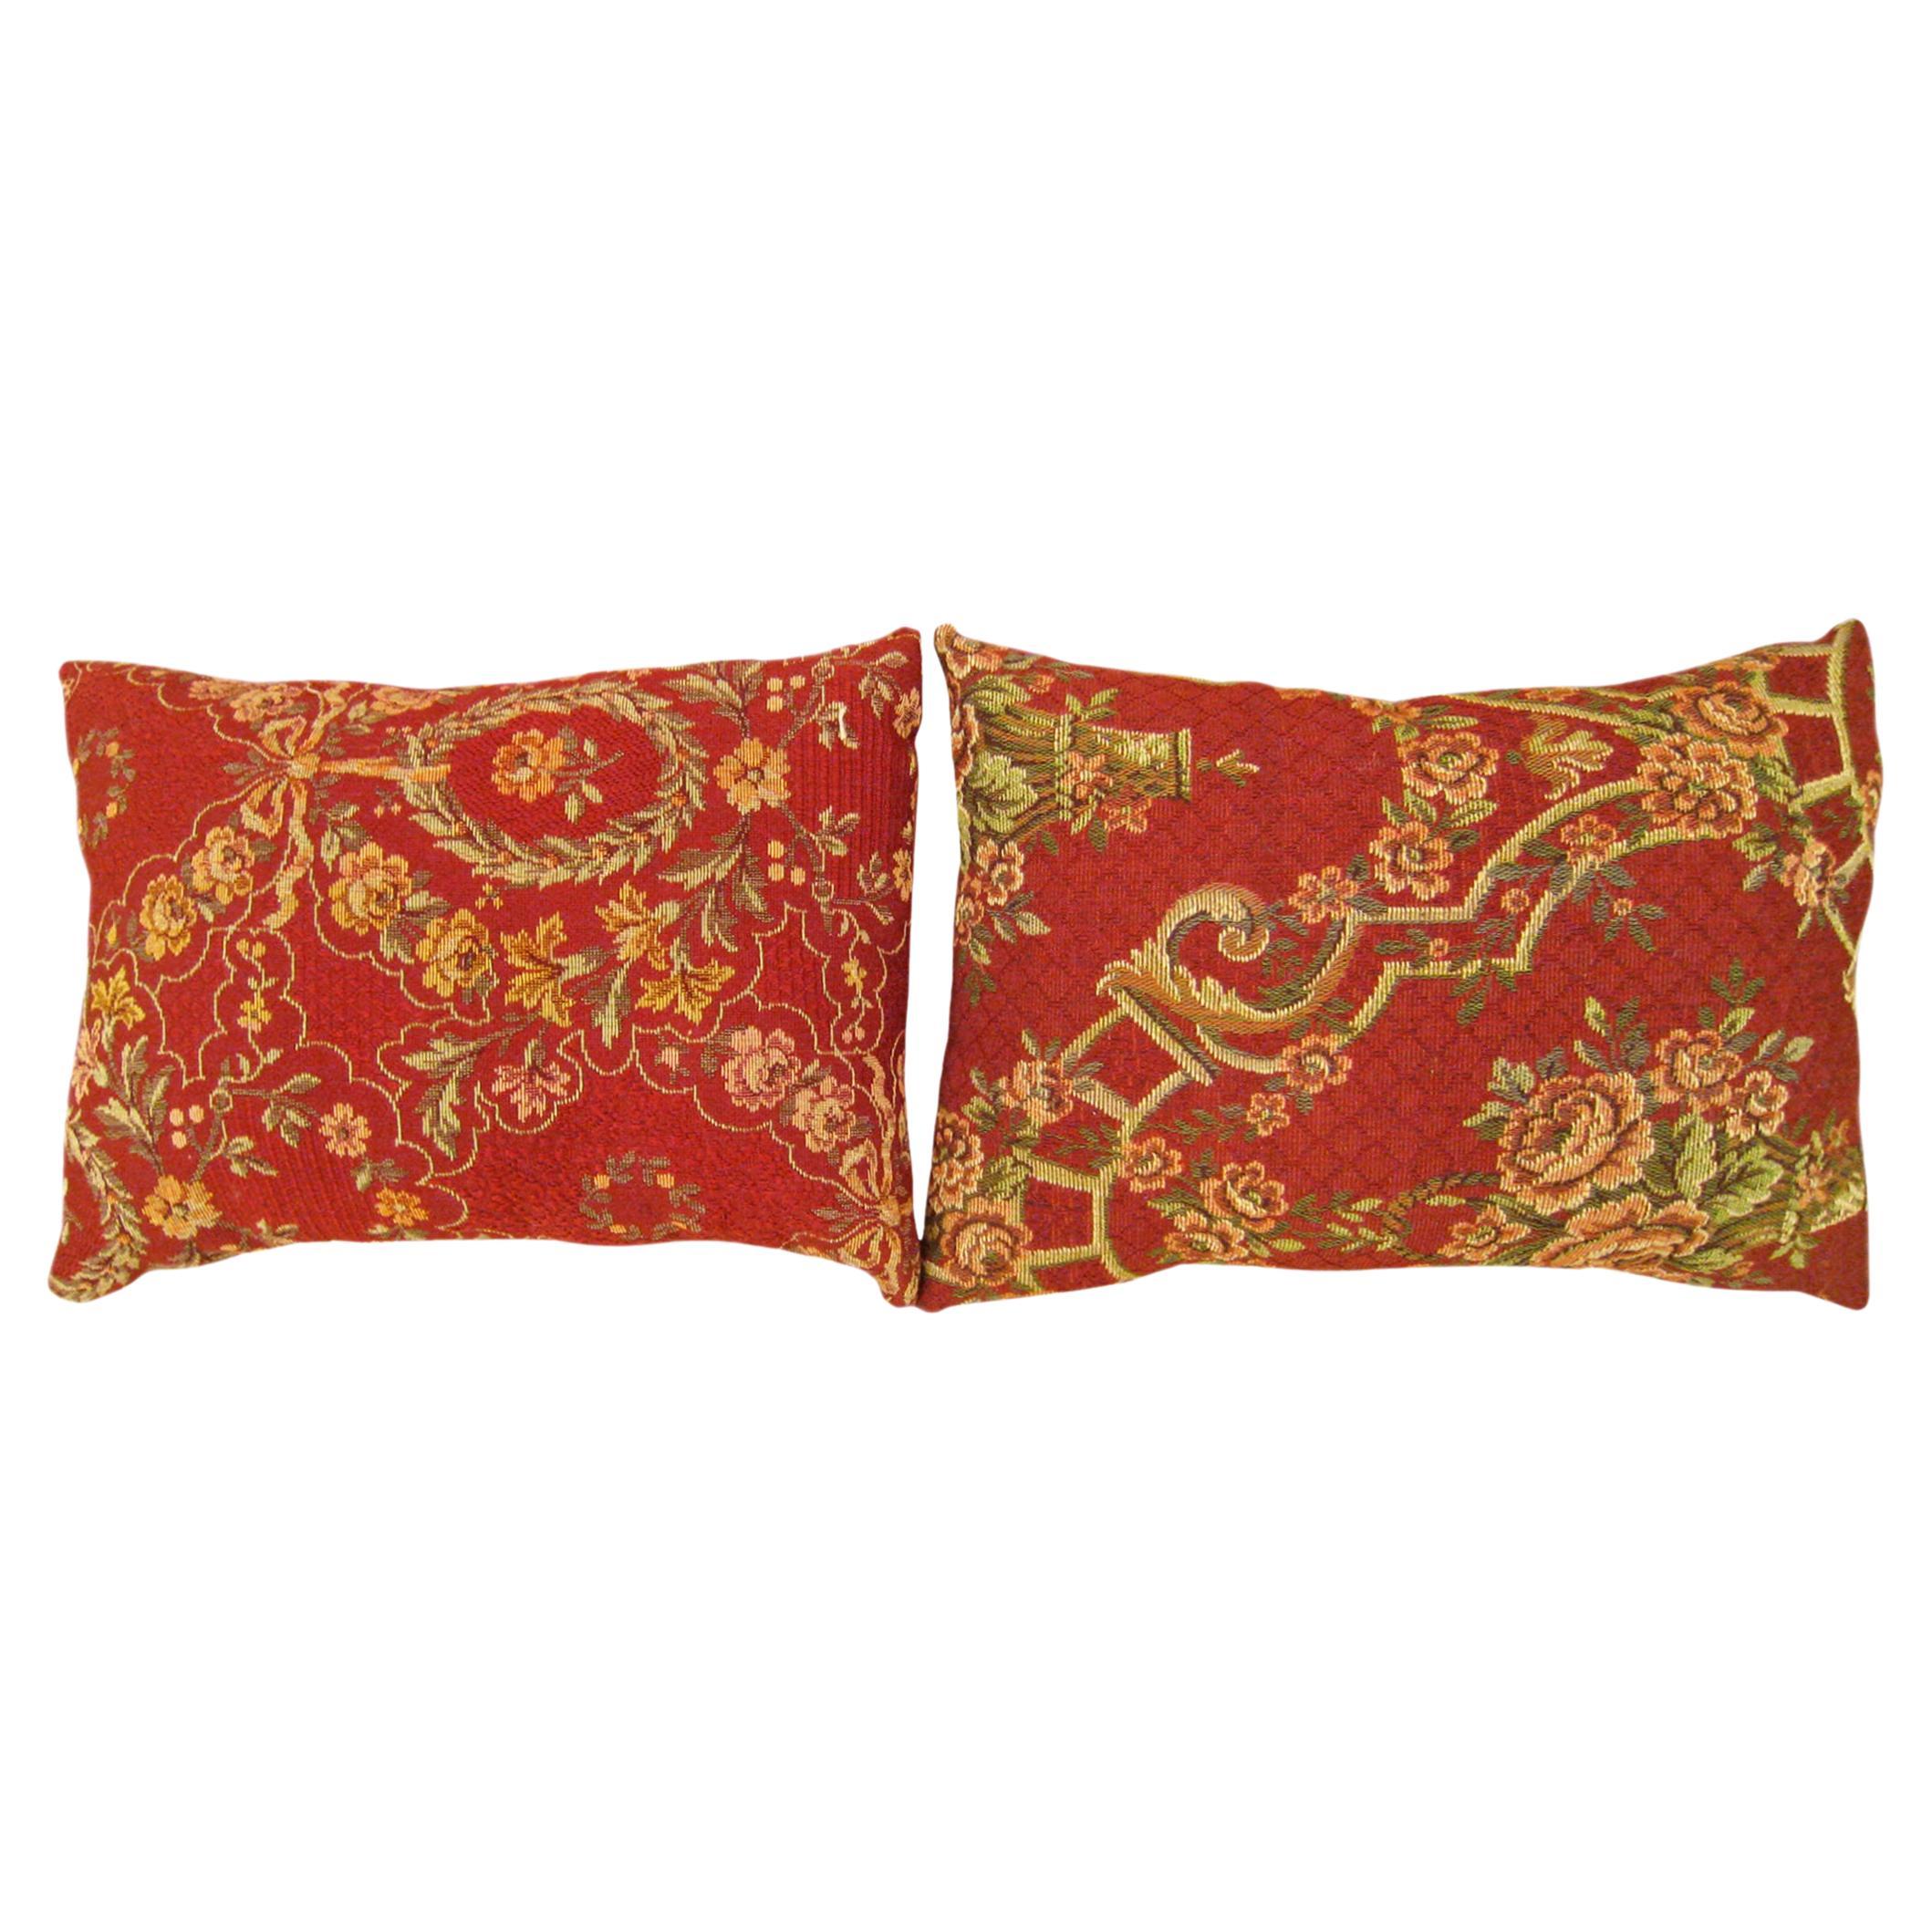 A Pair of Decorative Antique Jacquard Tapestry Pillows with Floral Elements  For Sale